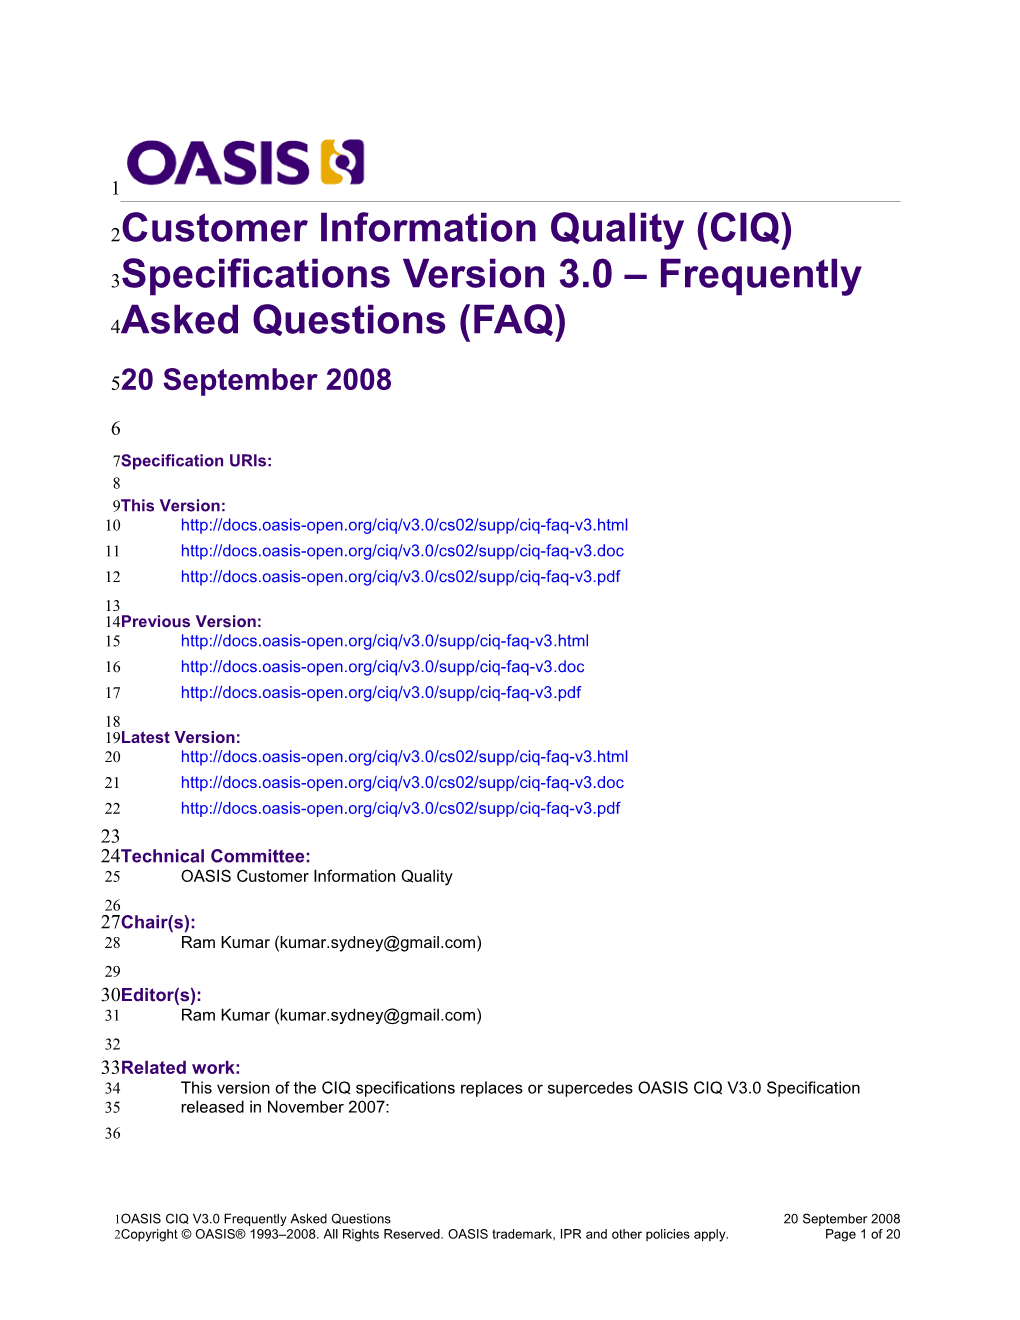 Customer Information Quality (CIQ) Specifications Version 3.0 Frequently Asked Questions (FAQ)